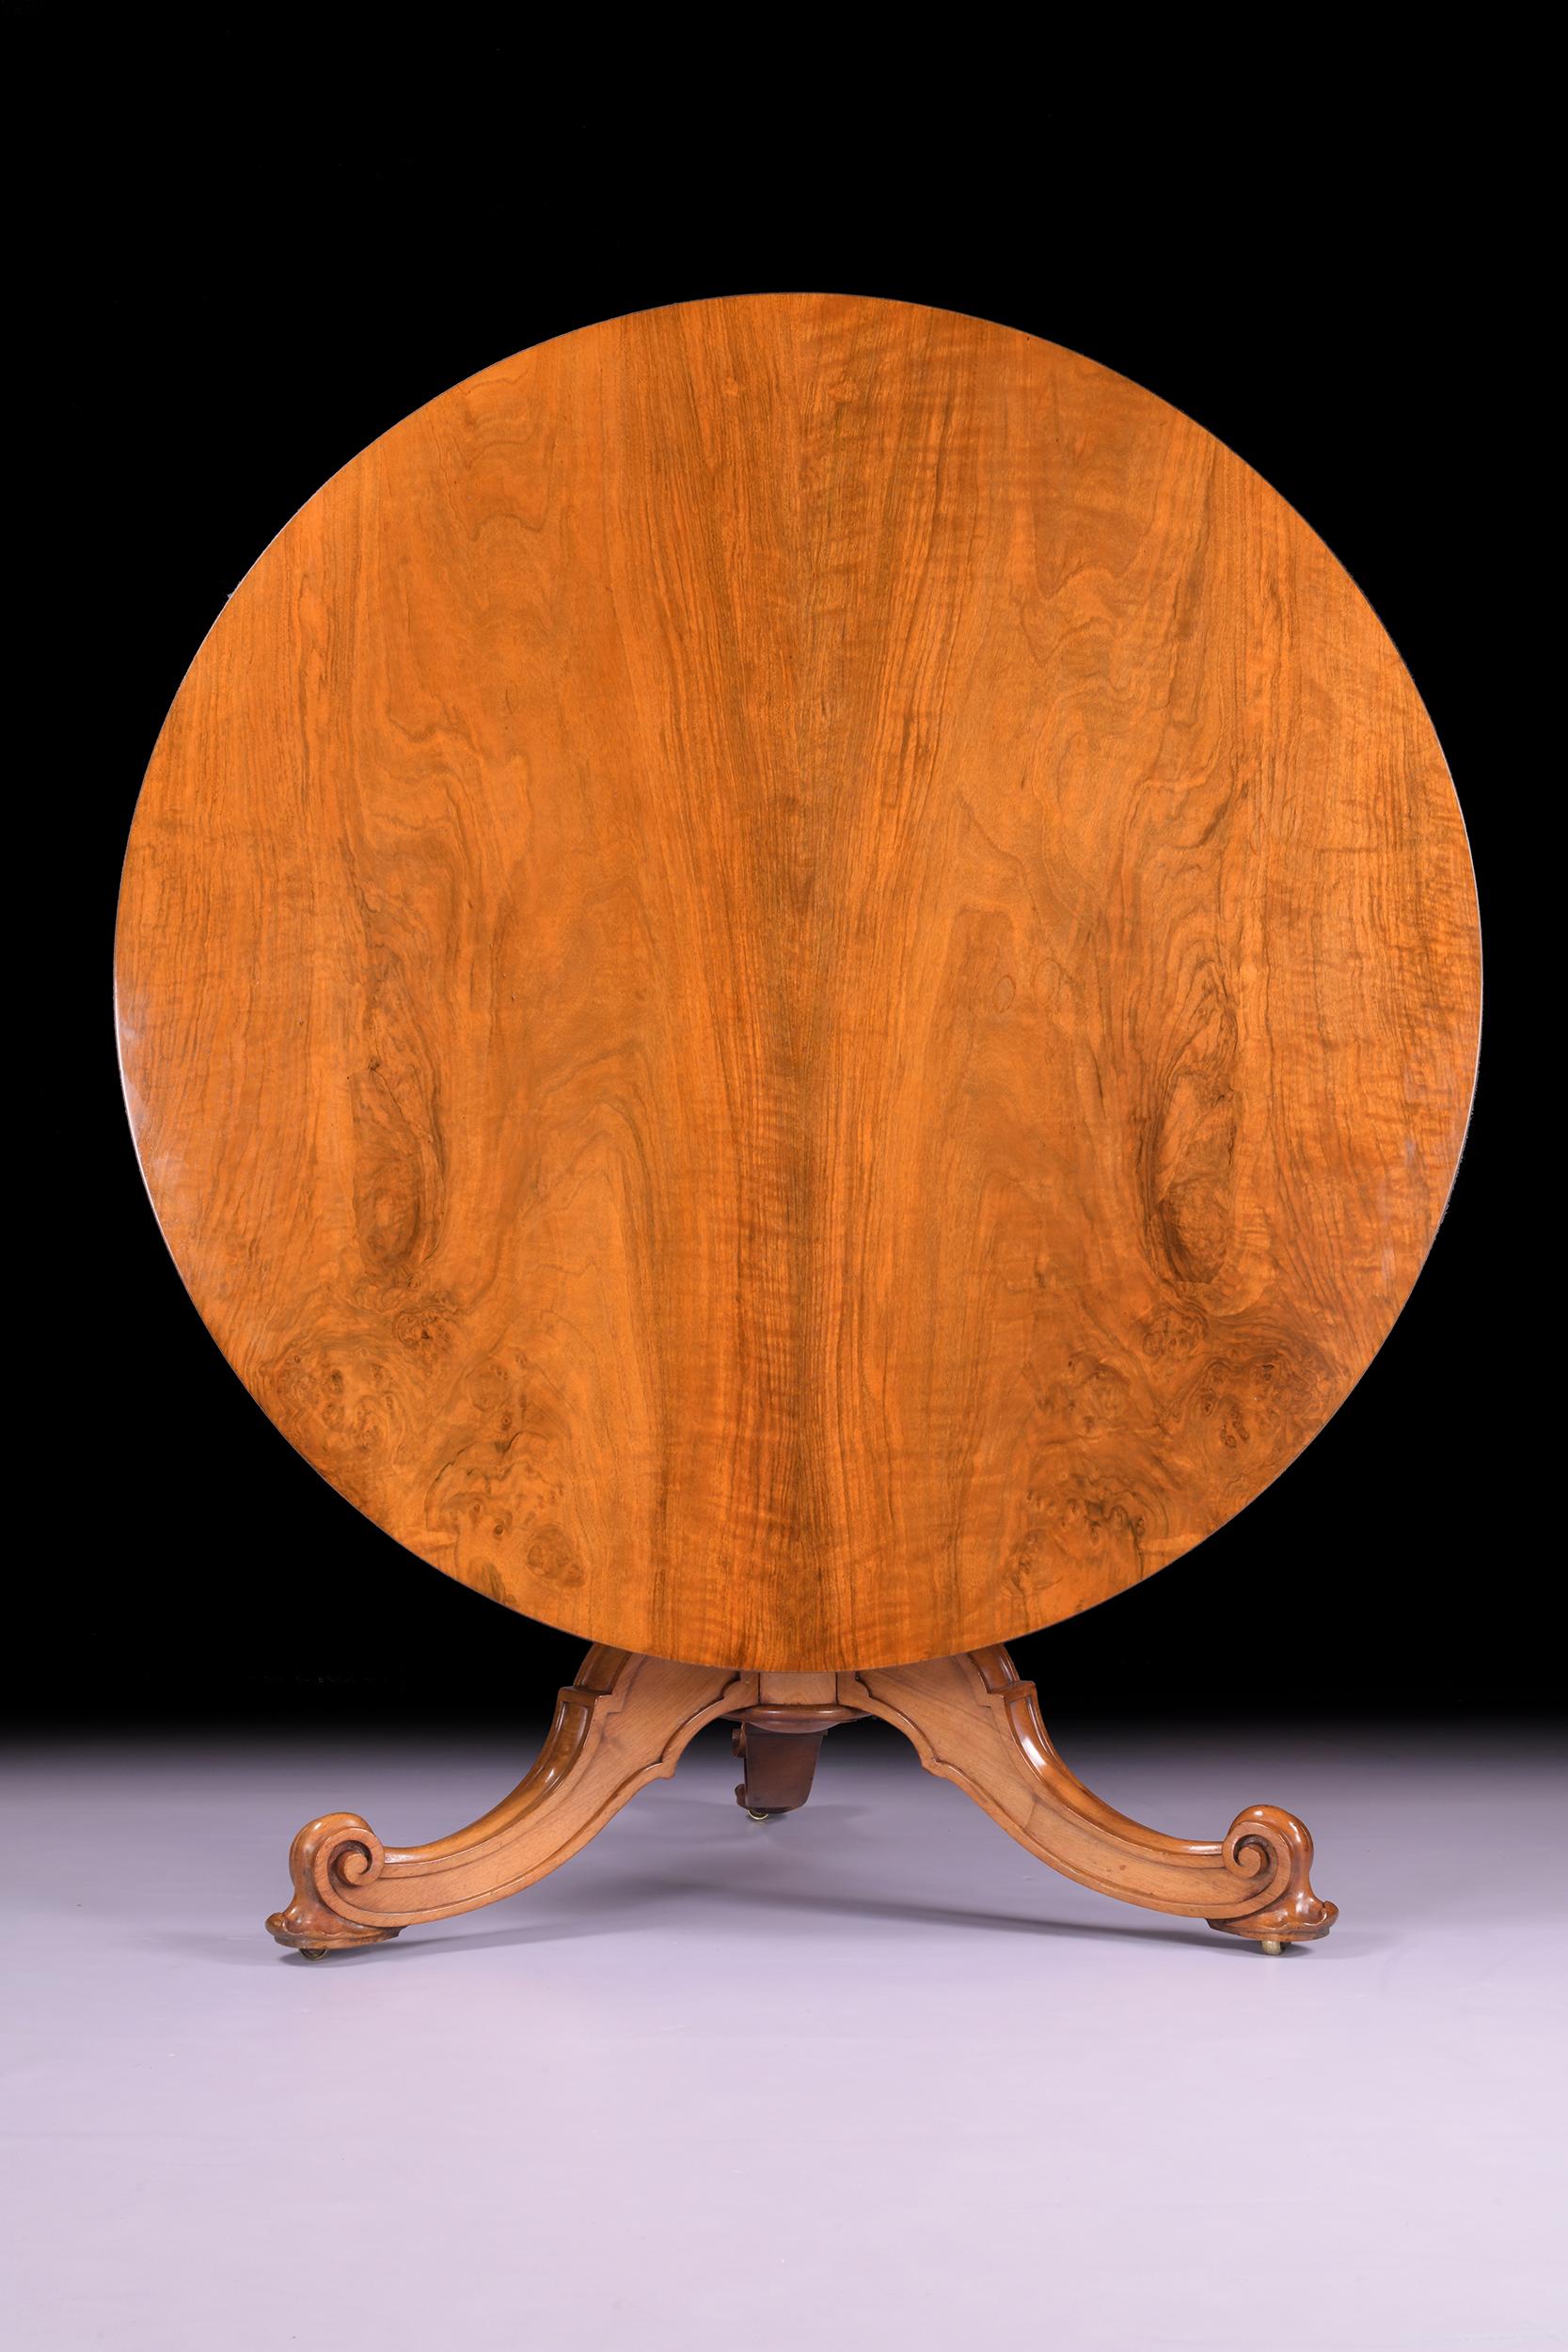 A very fine 19th century Satinwood centre table by Holland & Sons. The table is of finely figured Satinwood with a circular tilt-top above a baluster column with three S-scroll and leaf-carved legs, with the original disguised castors.
Stamped: